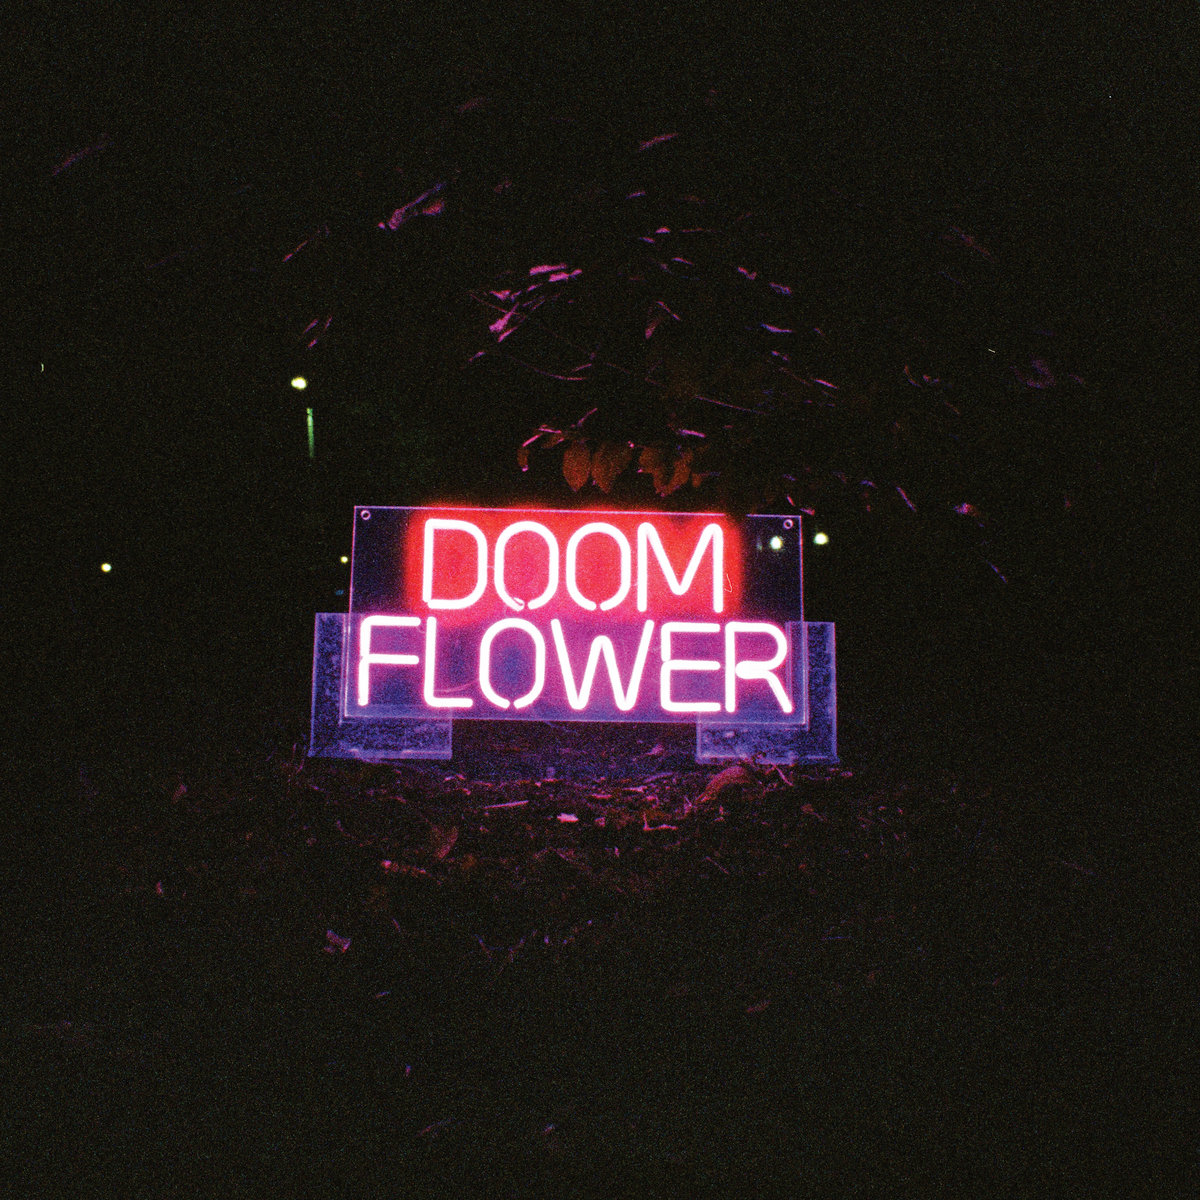 the artwork for the self-titled album by Doom Flower